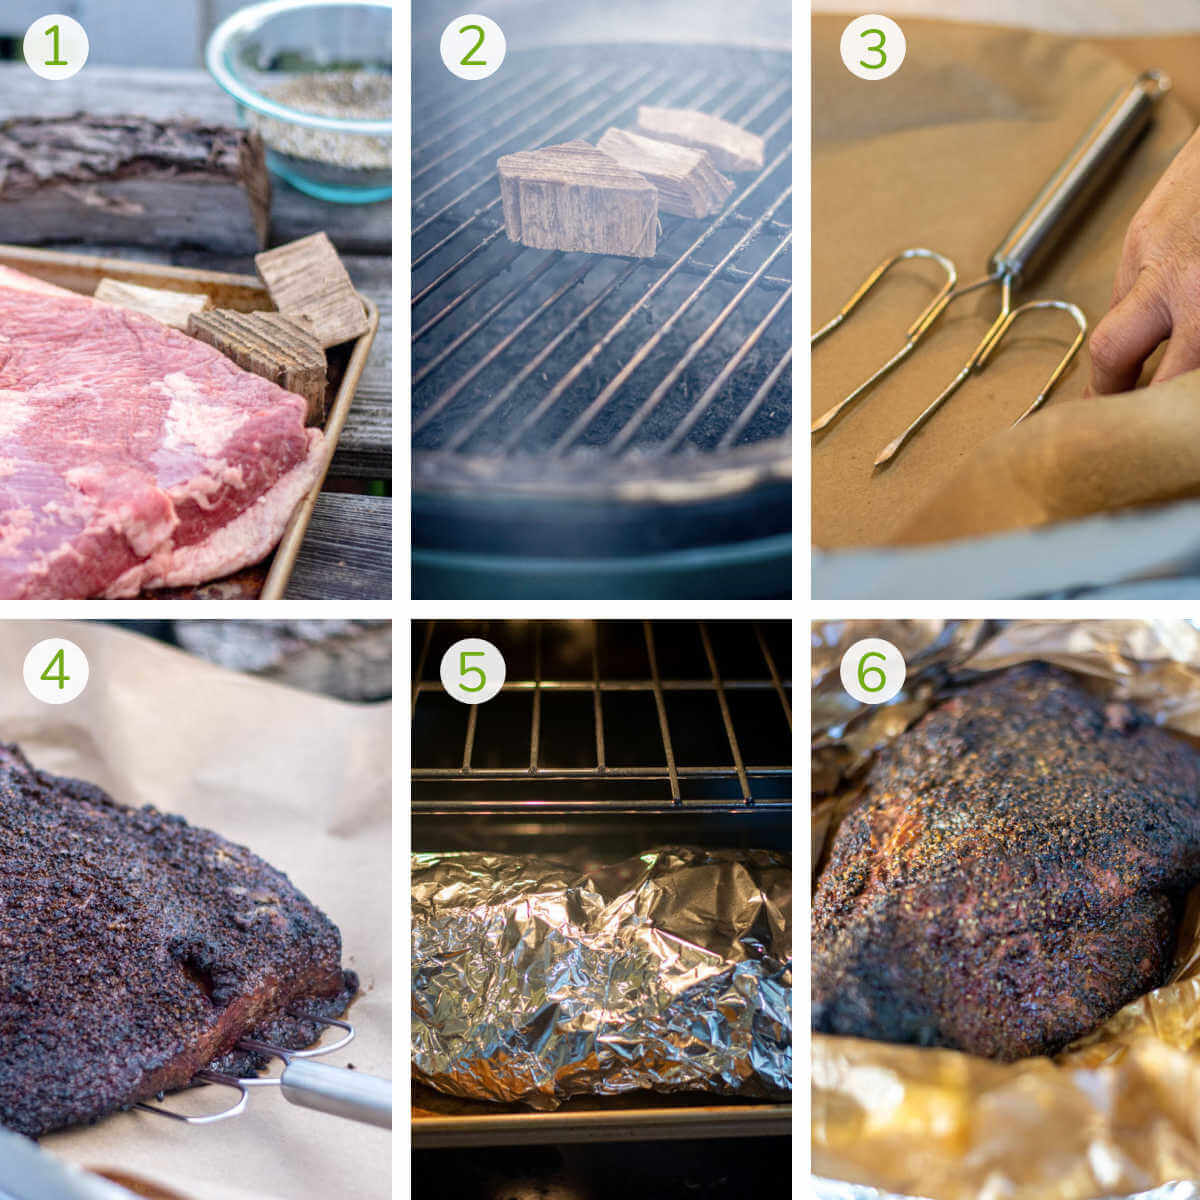 six process photos showing trimming the meat, smoking it, wrapping it, finishing in the oven and serving.